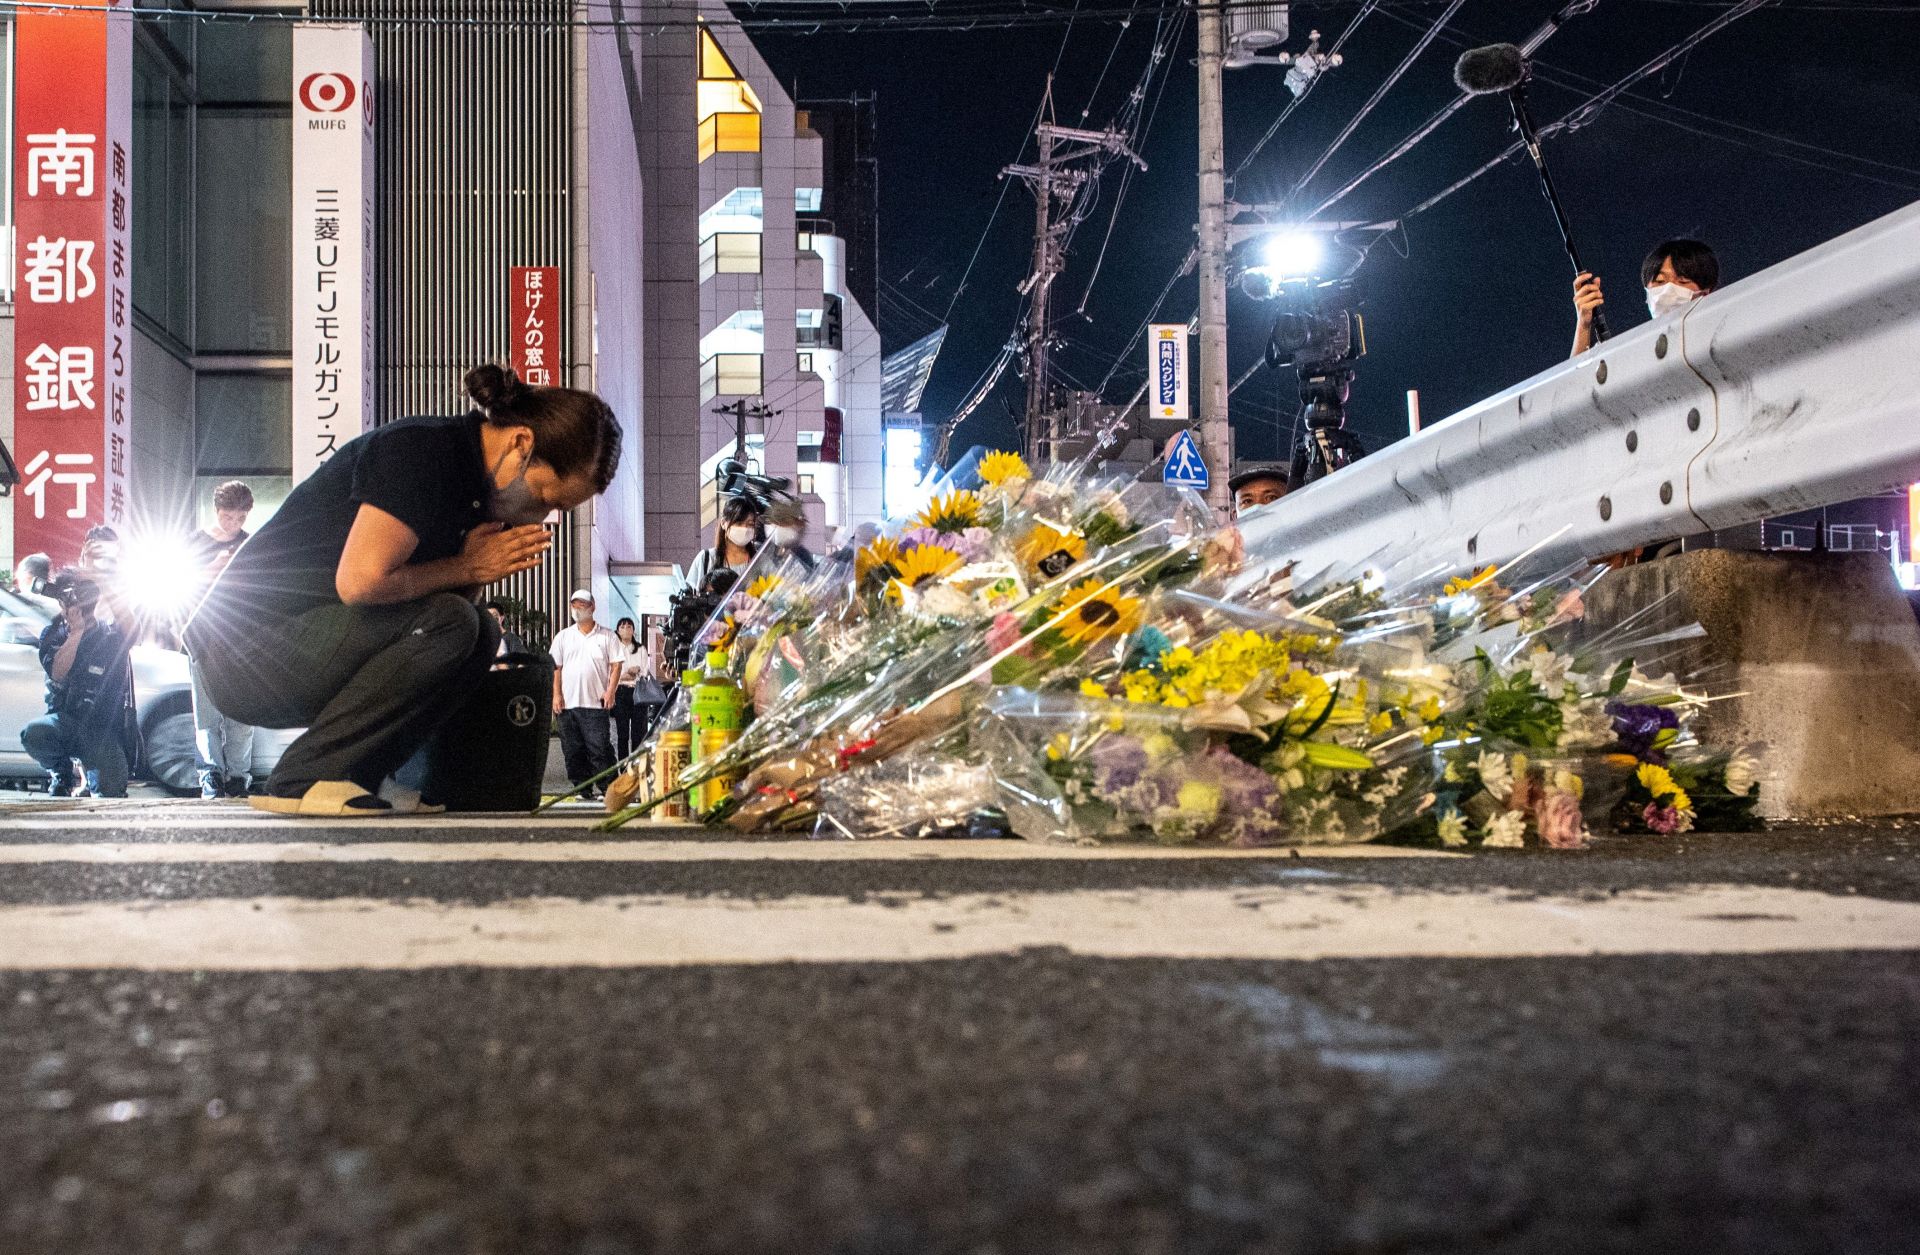 A woman mourns in front of a makeshift memorial outside the train station where former Japanese Prime Minister Shinzo Abe was shot and killed earlier in the day on July 8, 2022.